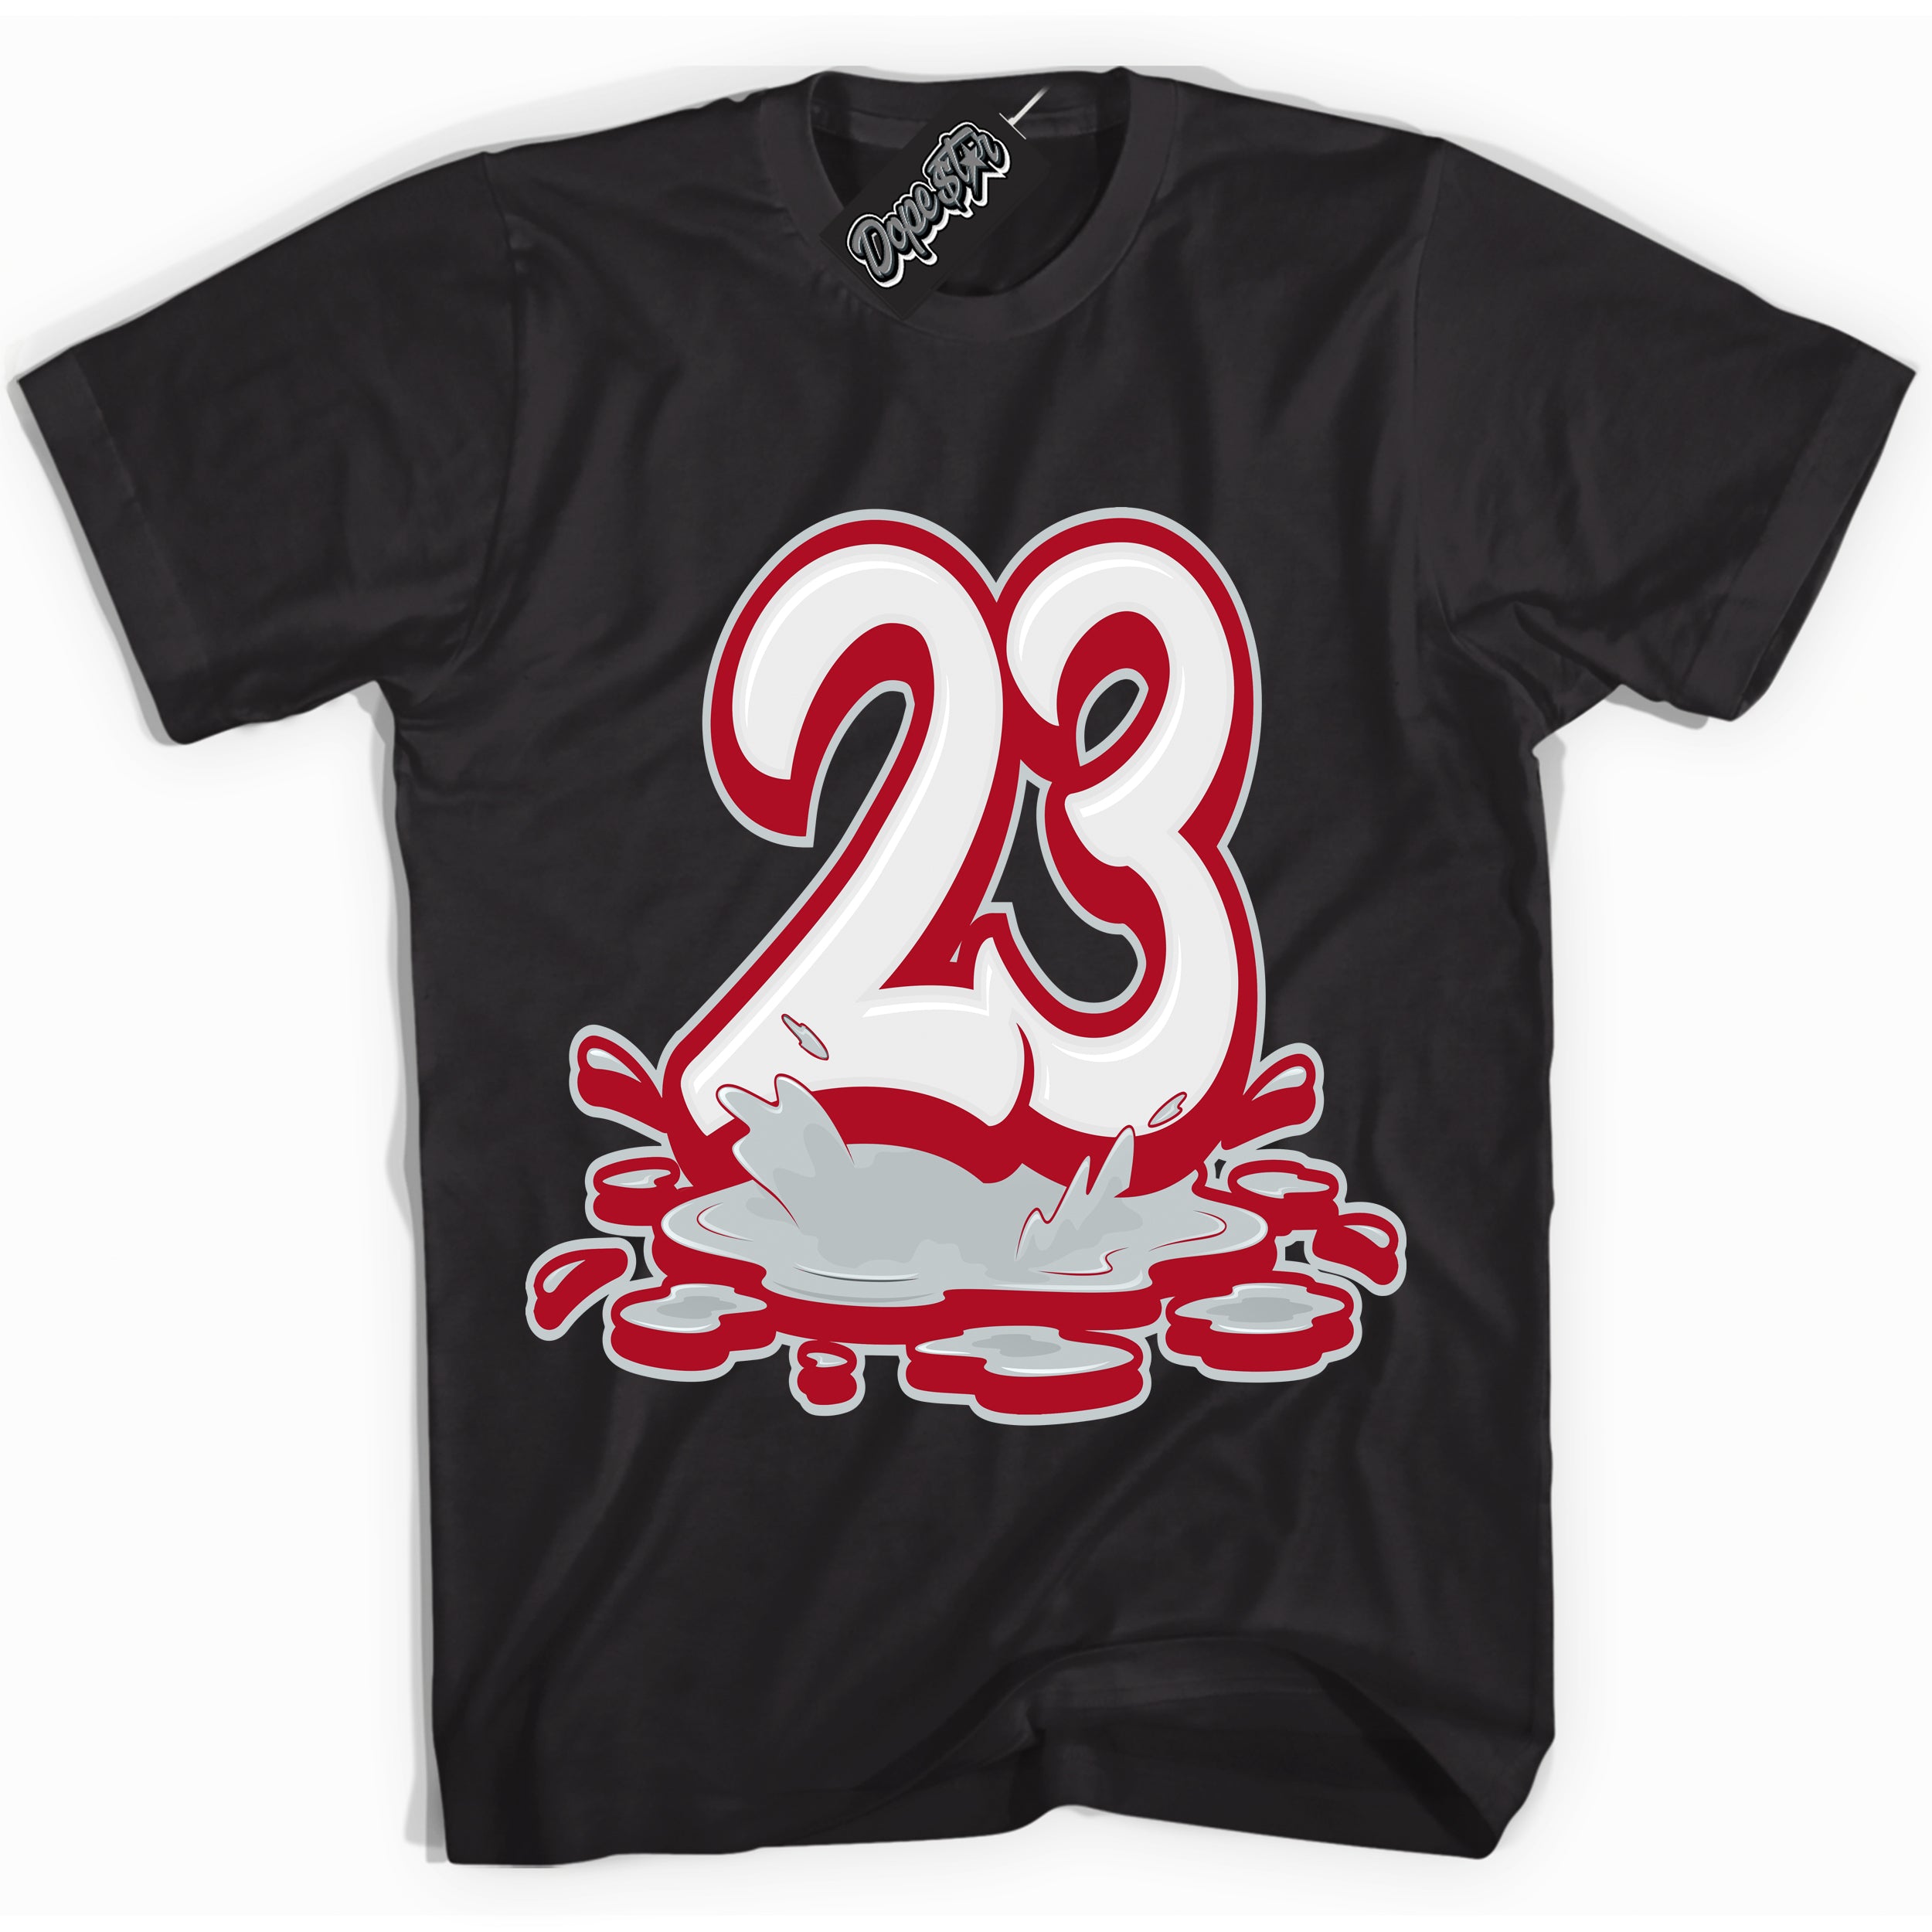 Cool Black Shirt with “ 23 Melting” design that perfectly matches Reverse Ultraman Sneakers.